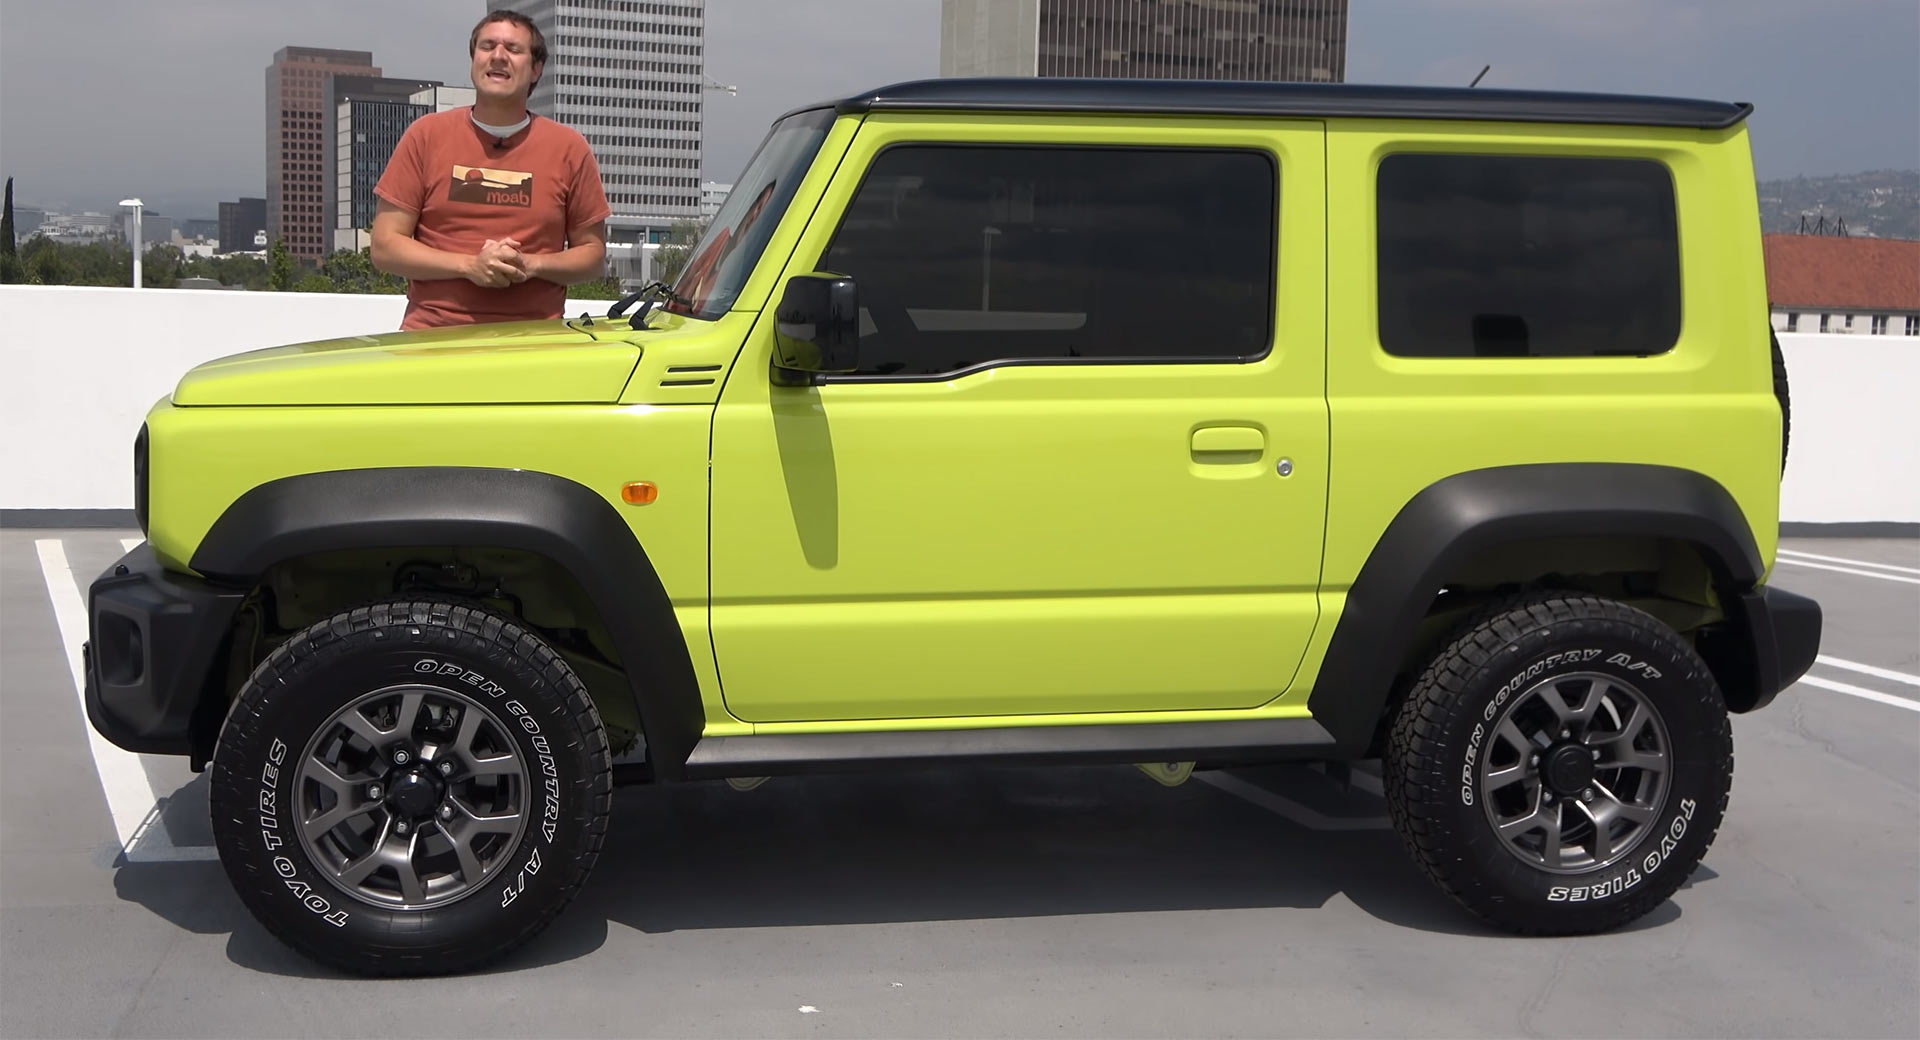 Can't Have a New Suzuki Jimny? Consider A Vintage One